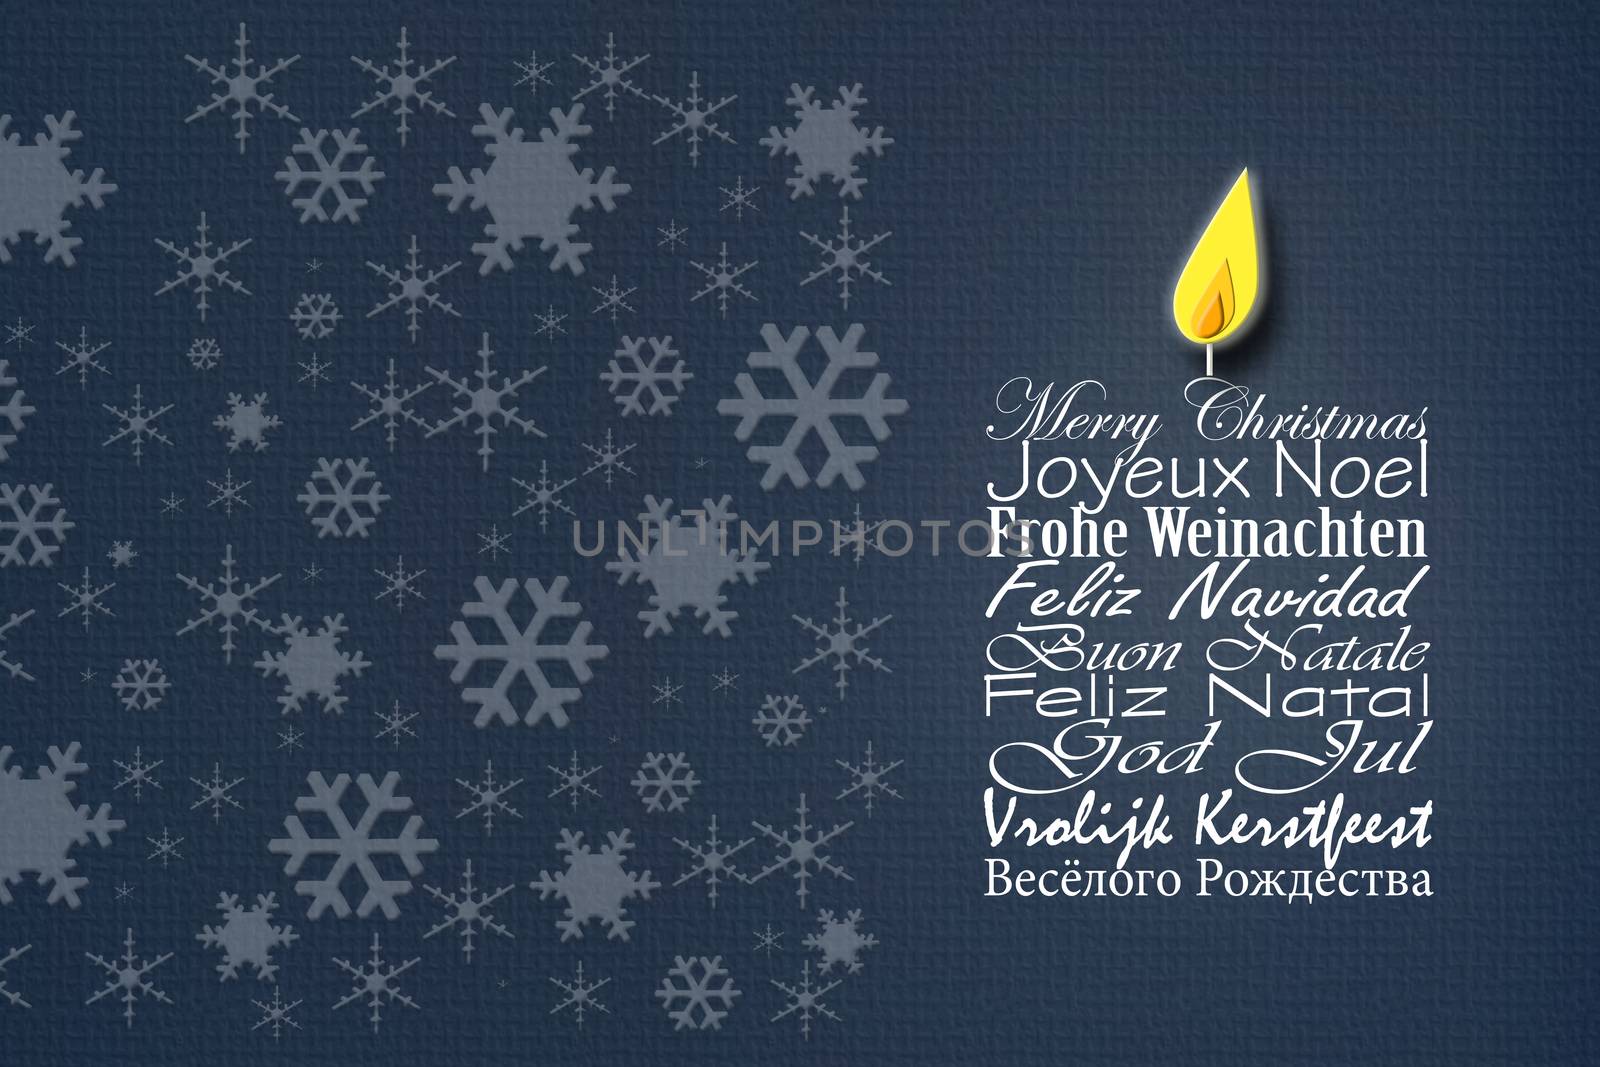 Merry Christmas wishes card in different Europian languages by NelliPolk